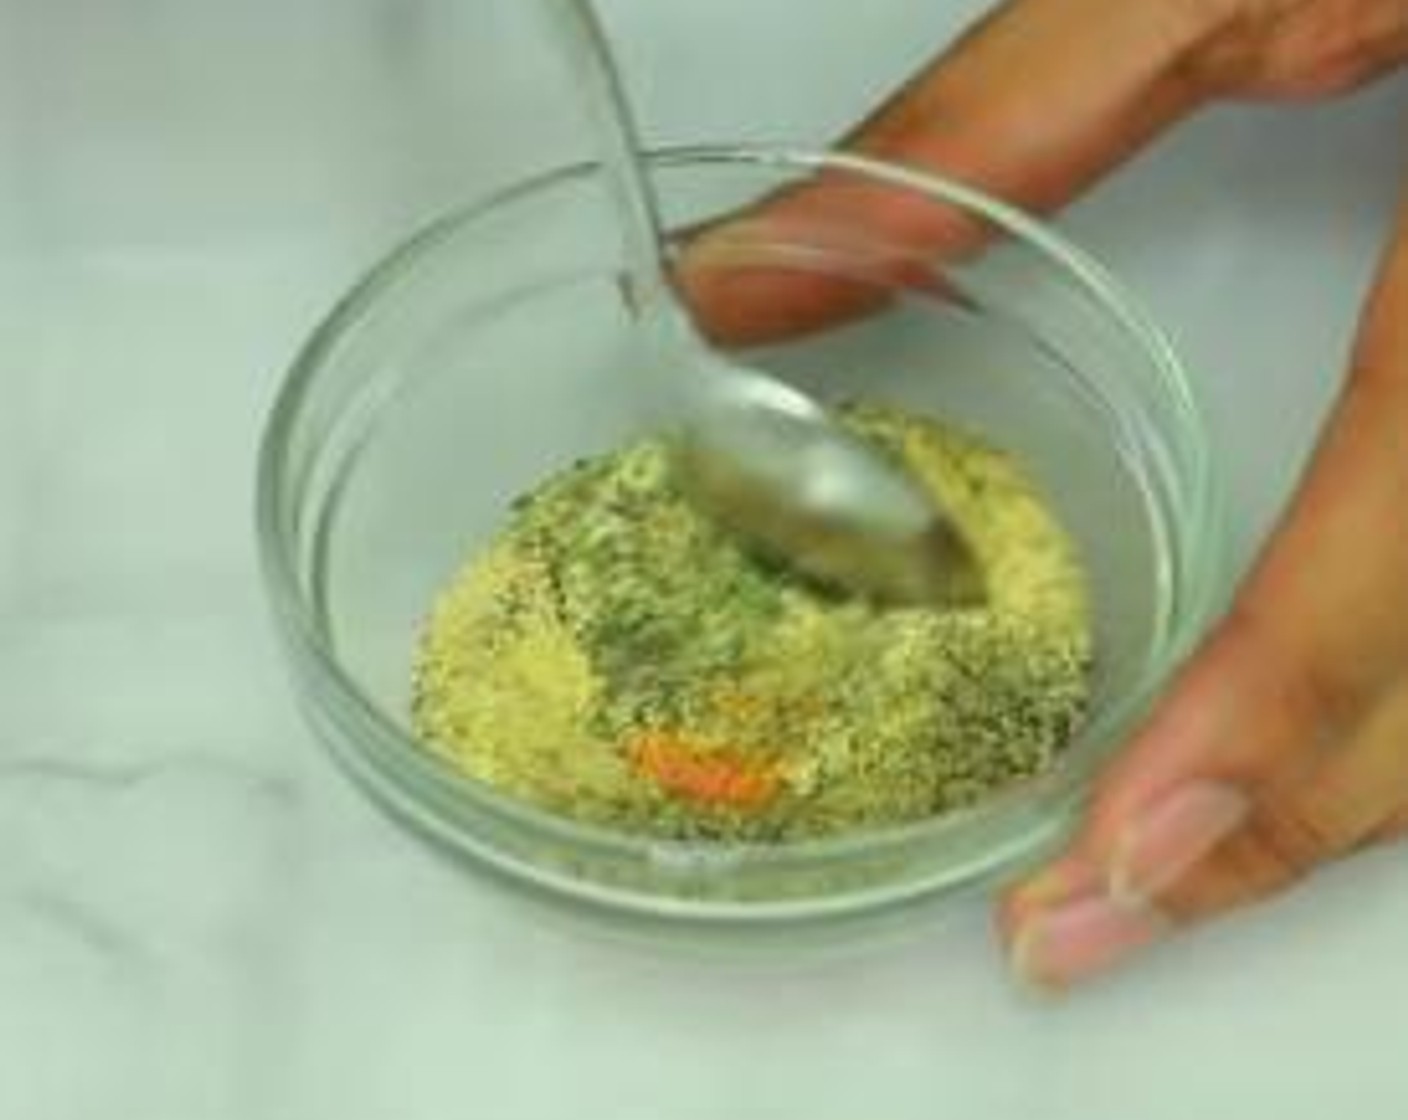 step 1 In a cup, mix together the Seasoned Salt (1/2 Tbsp), Dried Thyme (1 tsp), Onion Powder (1 tsp), McCormick® Garlic Powder (1 tsp), and Ground Black Pepper (3/4 tsp).